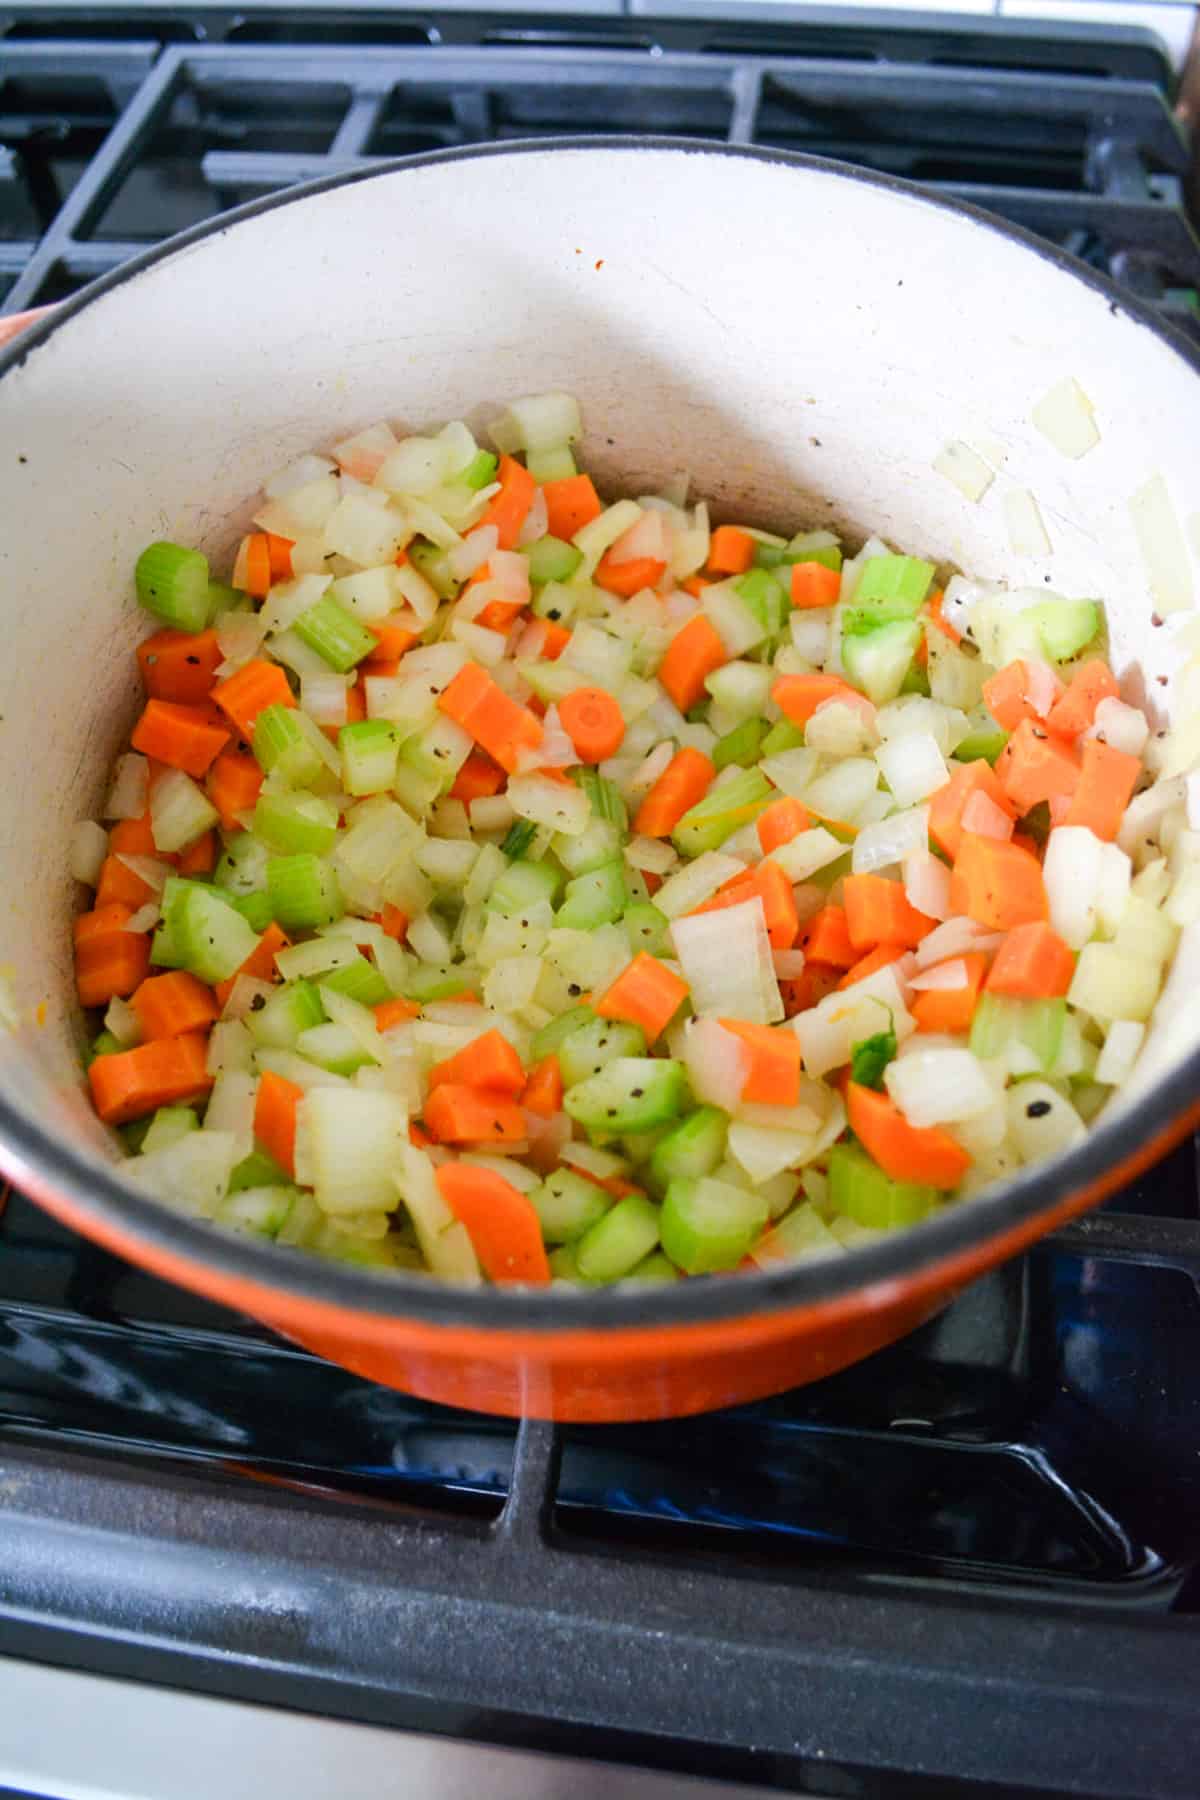 Garlic added into the pot of softened onion, carrot and celery.